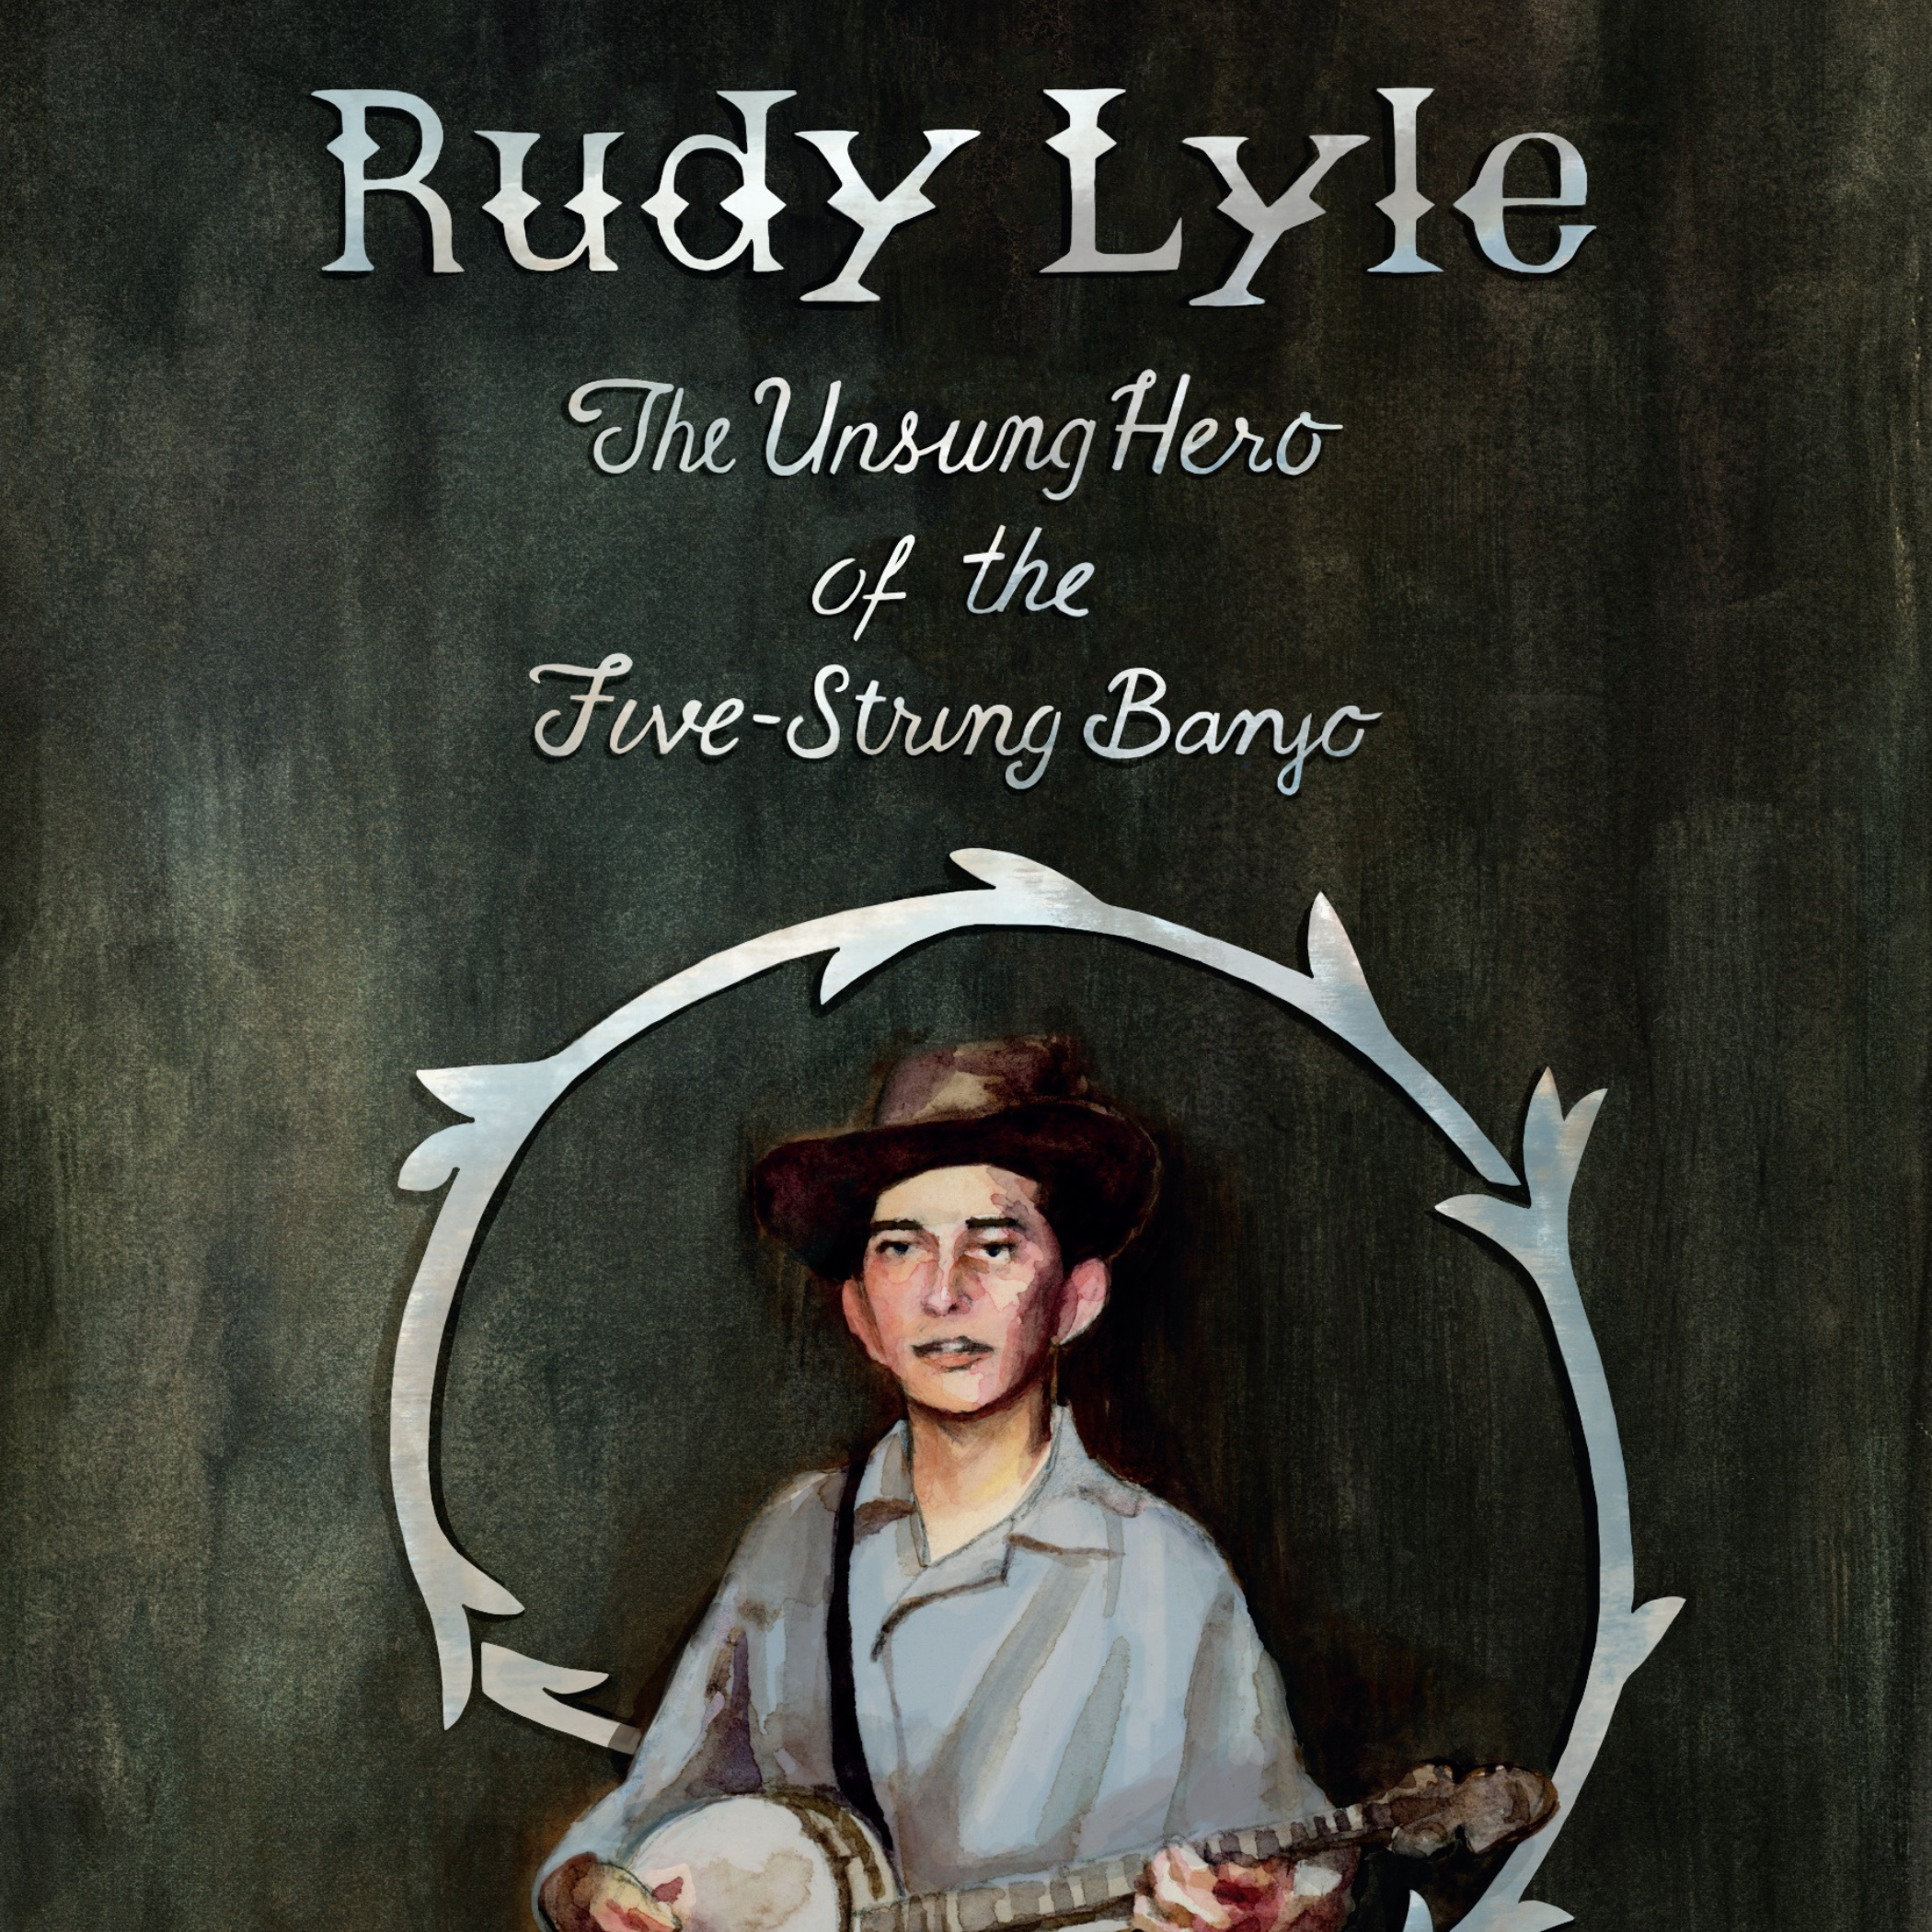 Read a Chapter From 'Rudy Lyle: The Unsung Hero of the Five-String Banjo'